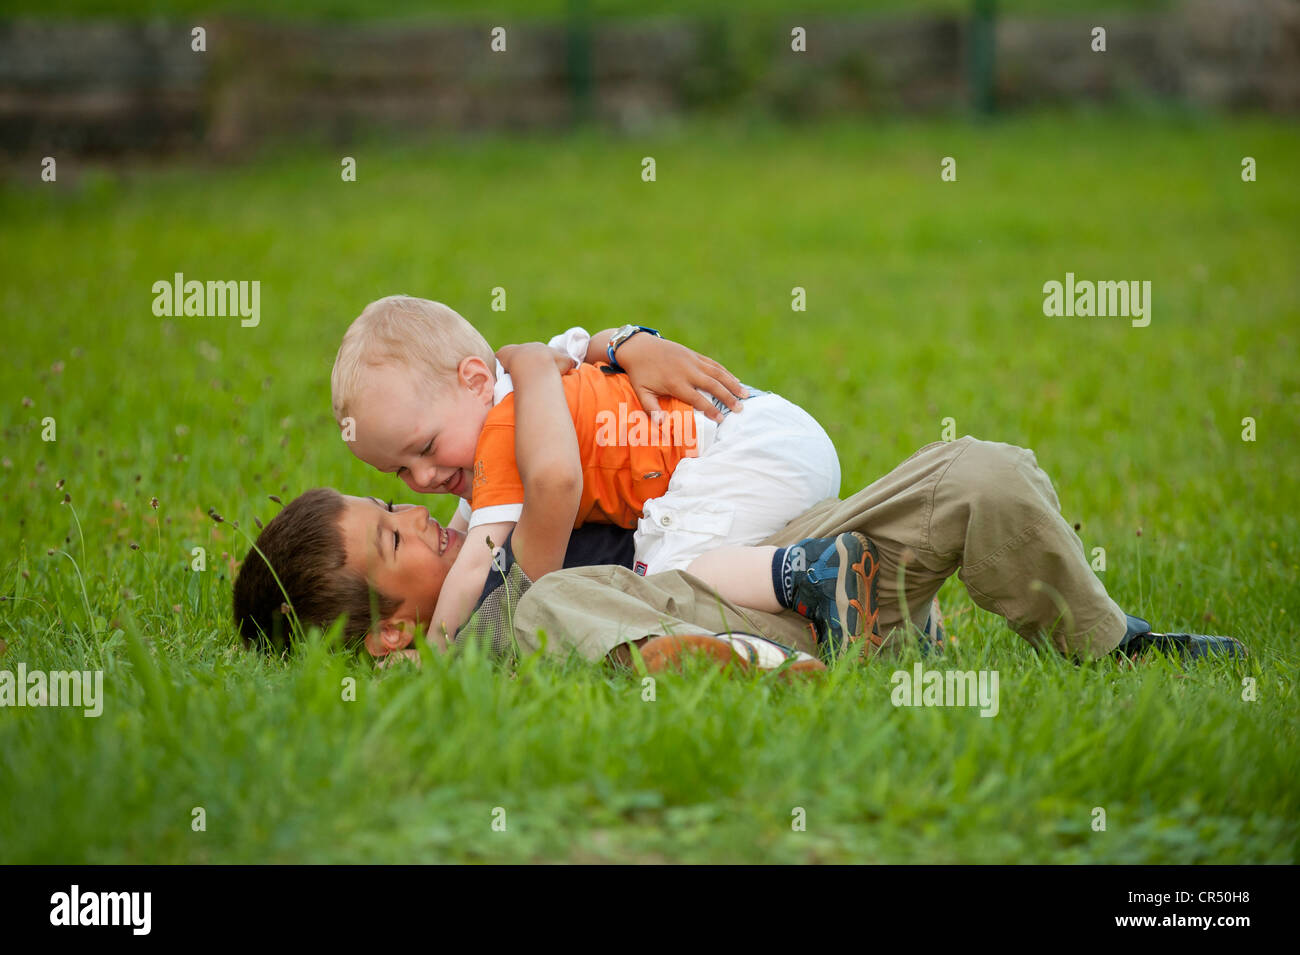 Boy, 6 years, playing with his little brother, 2 years, on a meadow Stock Photo